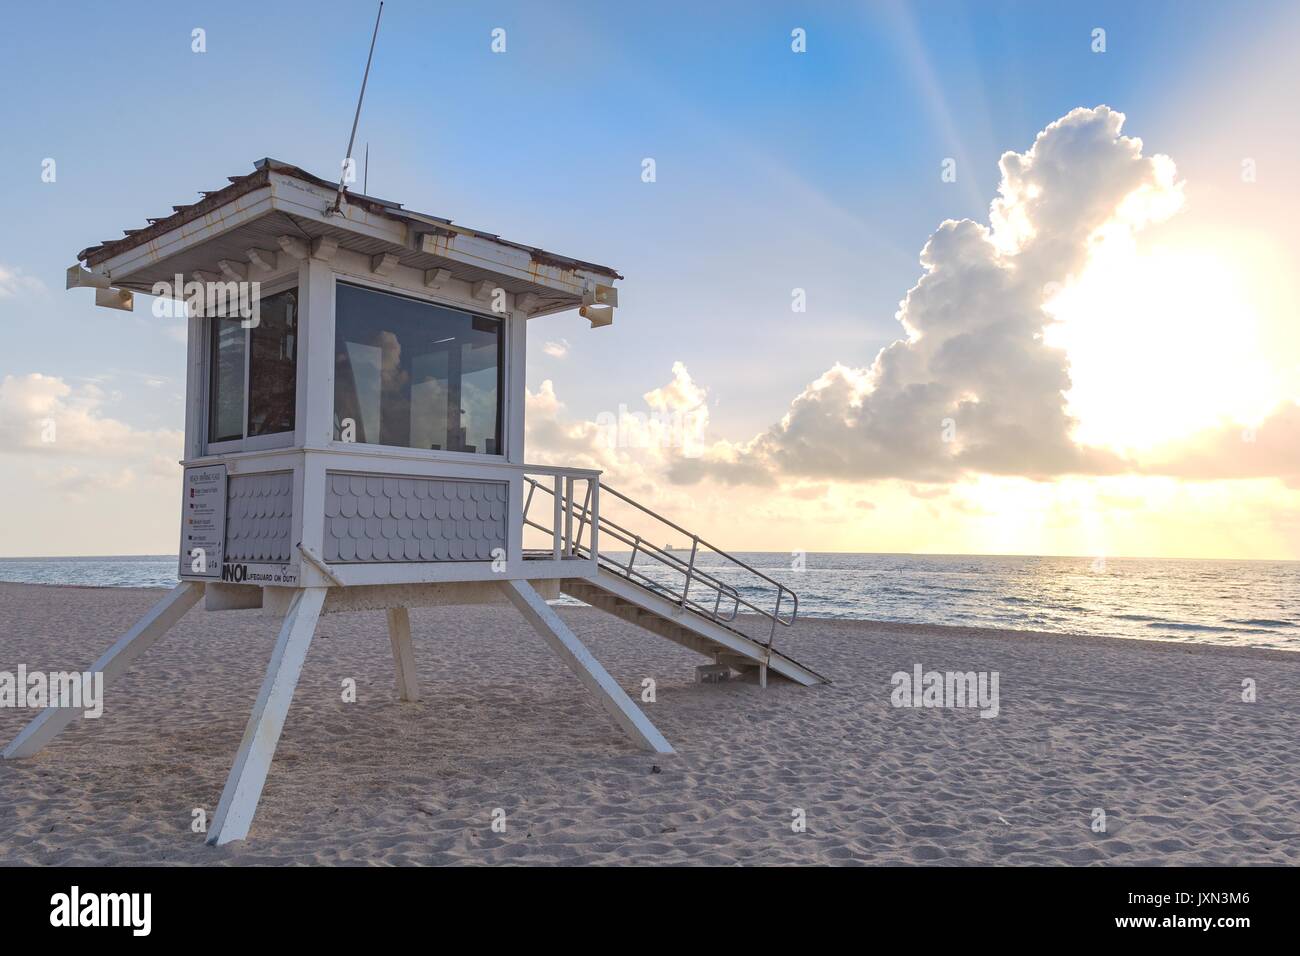 A life guard stand on a beach near Las Olas in Ft. Lauderdale, FL on a summer's morning. Stock Photo